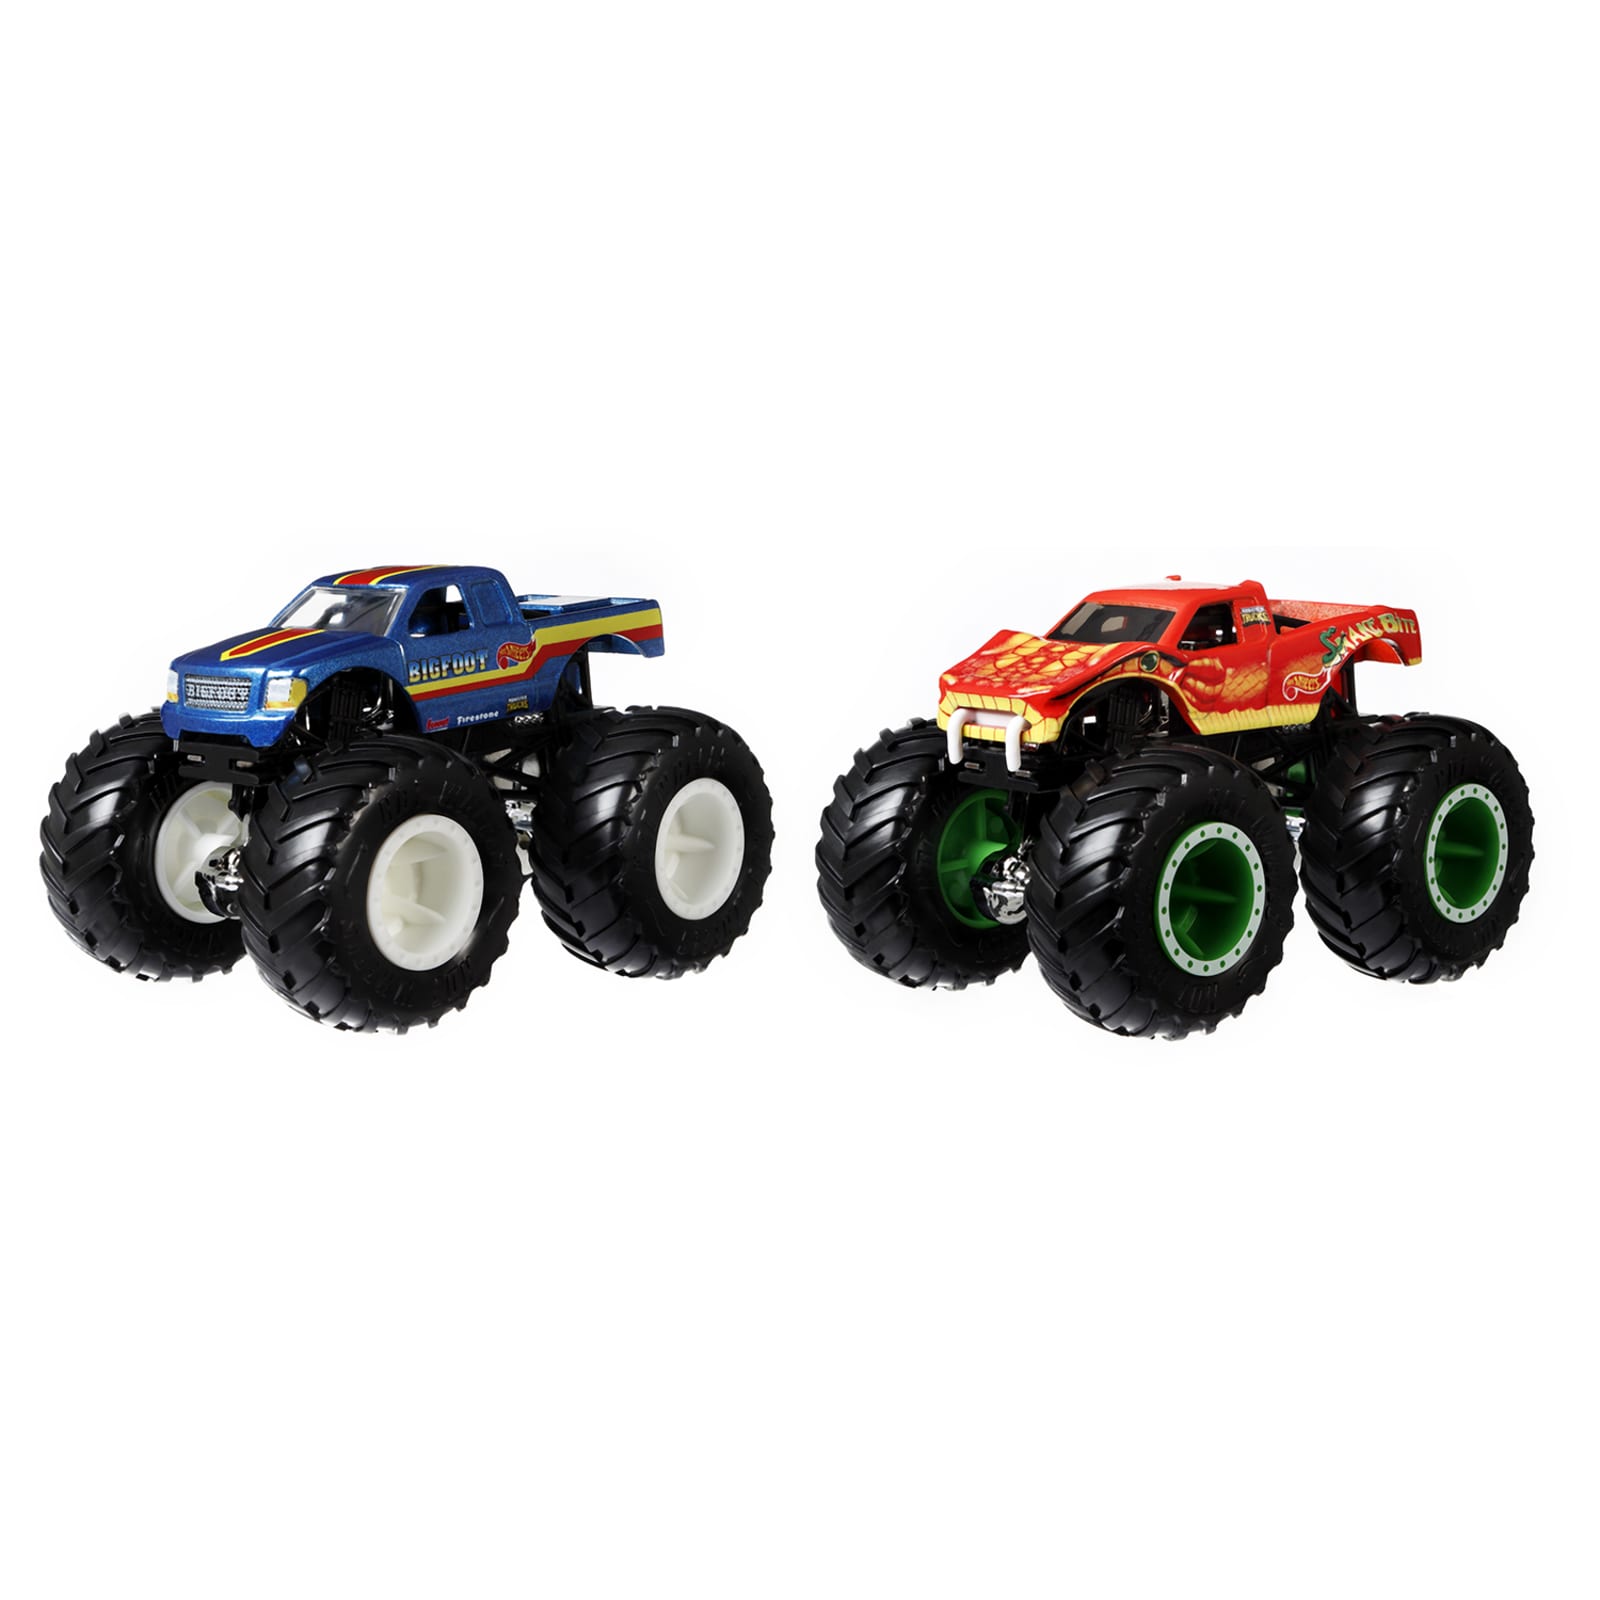 Hot Wheels 1:64 Scale Diecast Monster Truck, Assorted